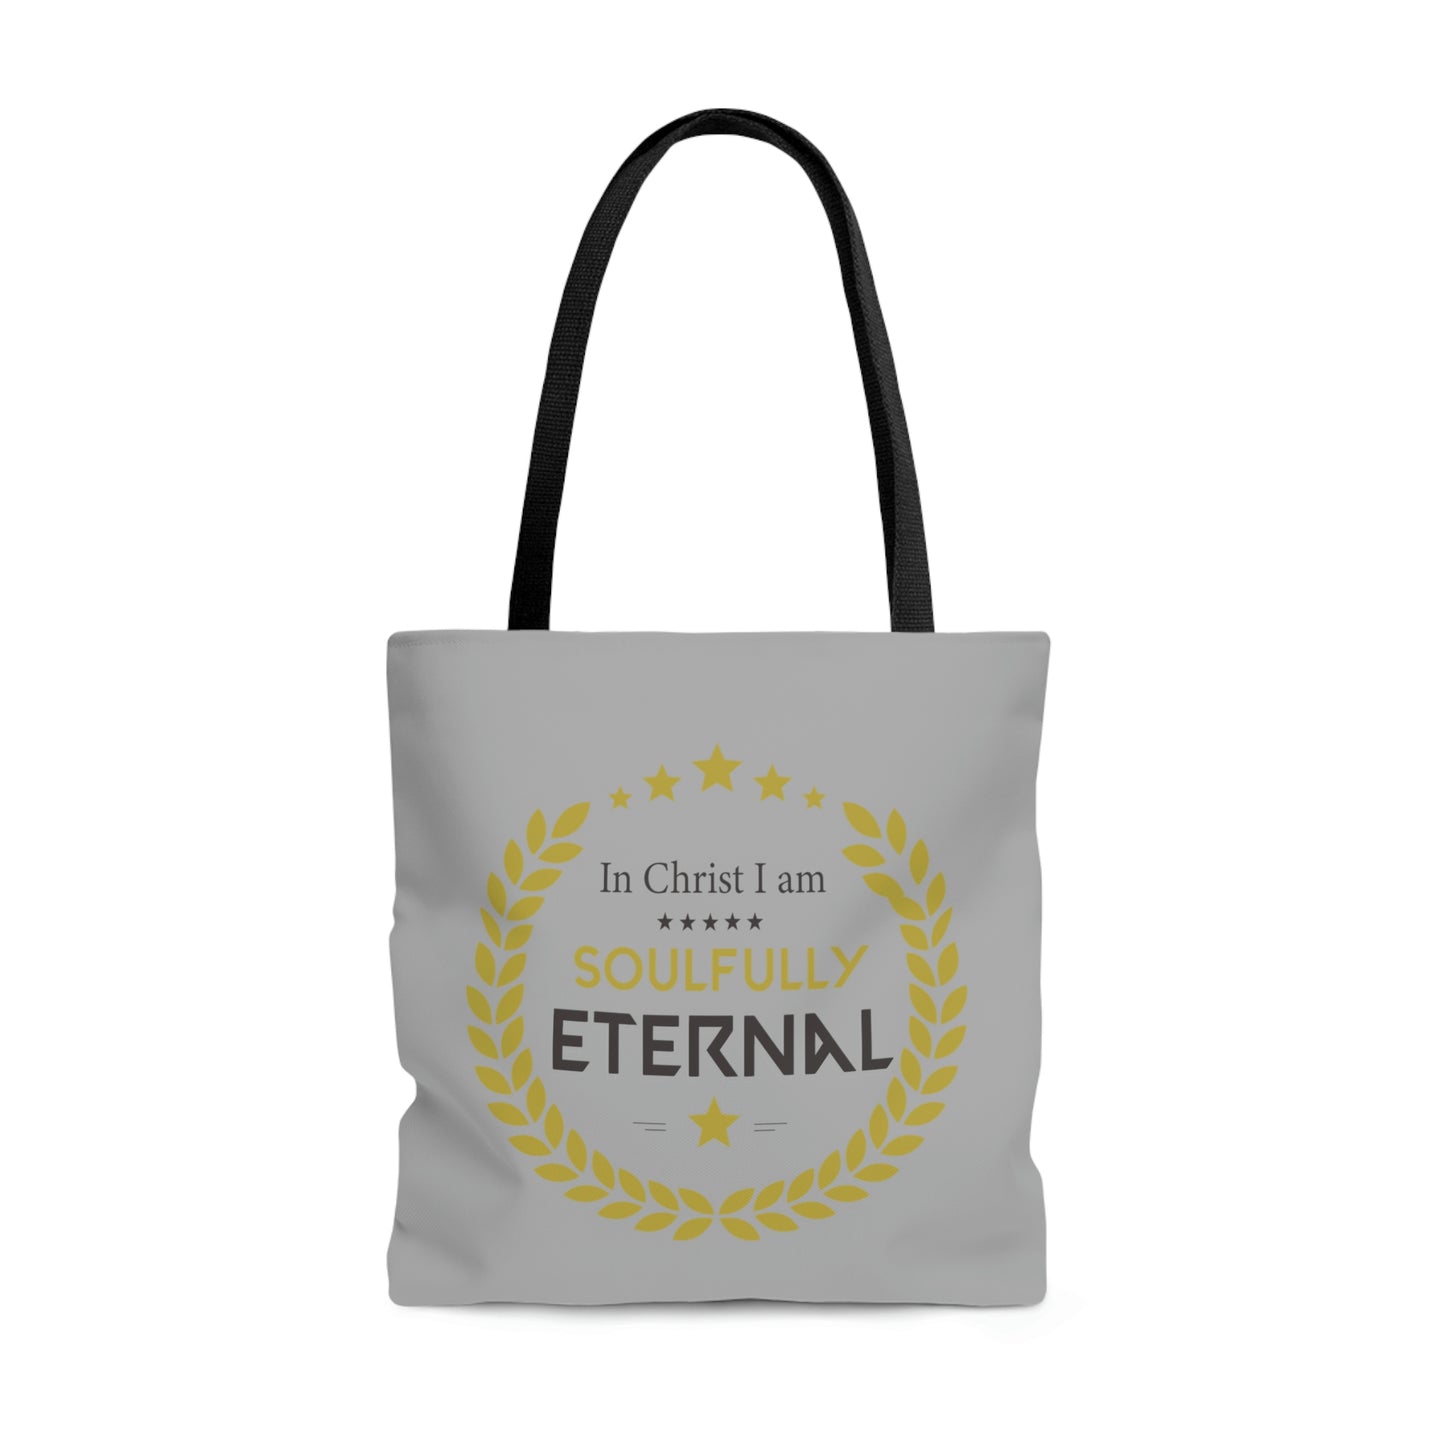 In Christ I Am Soulfully Eternal Tote Bag